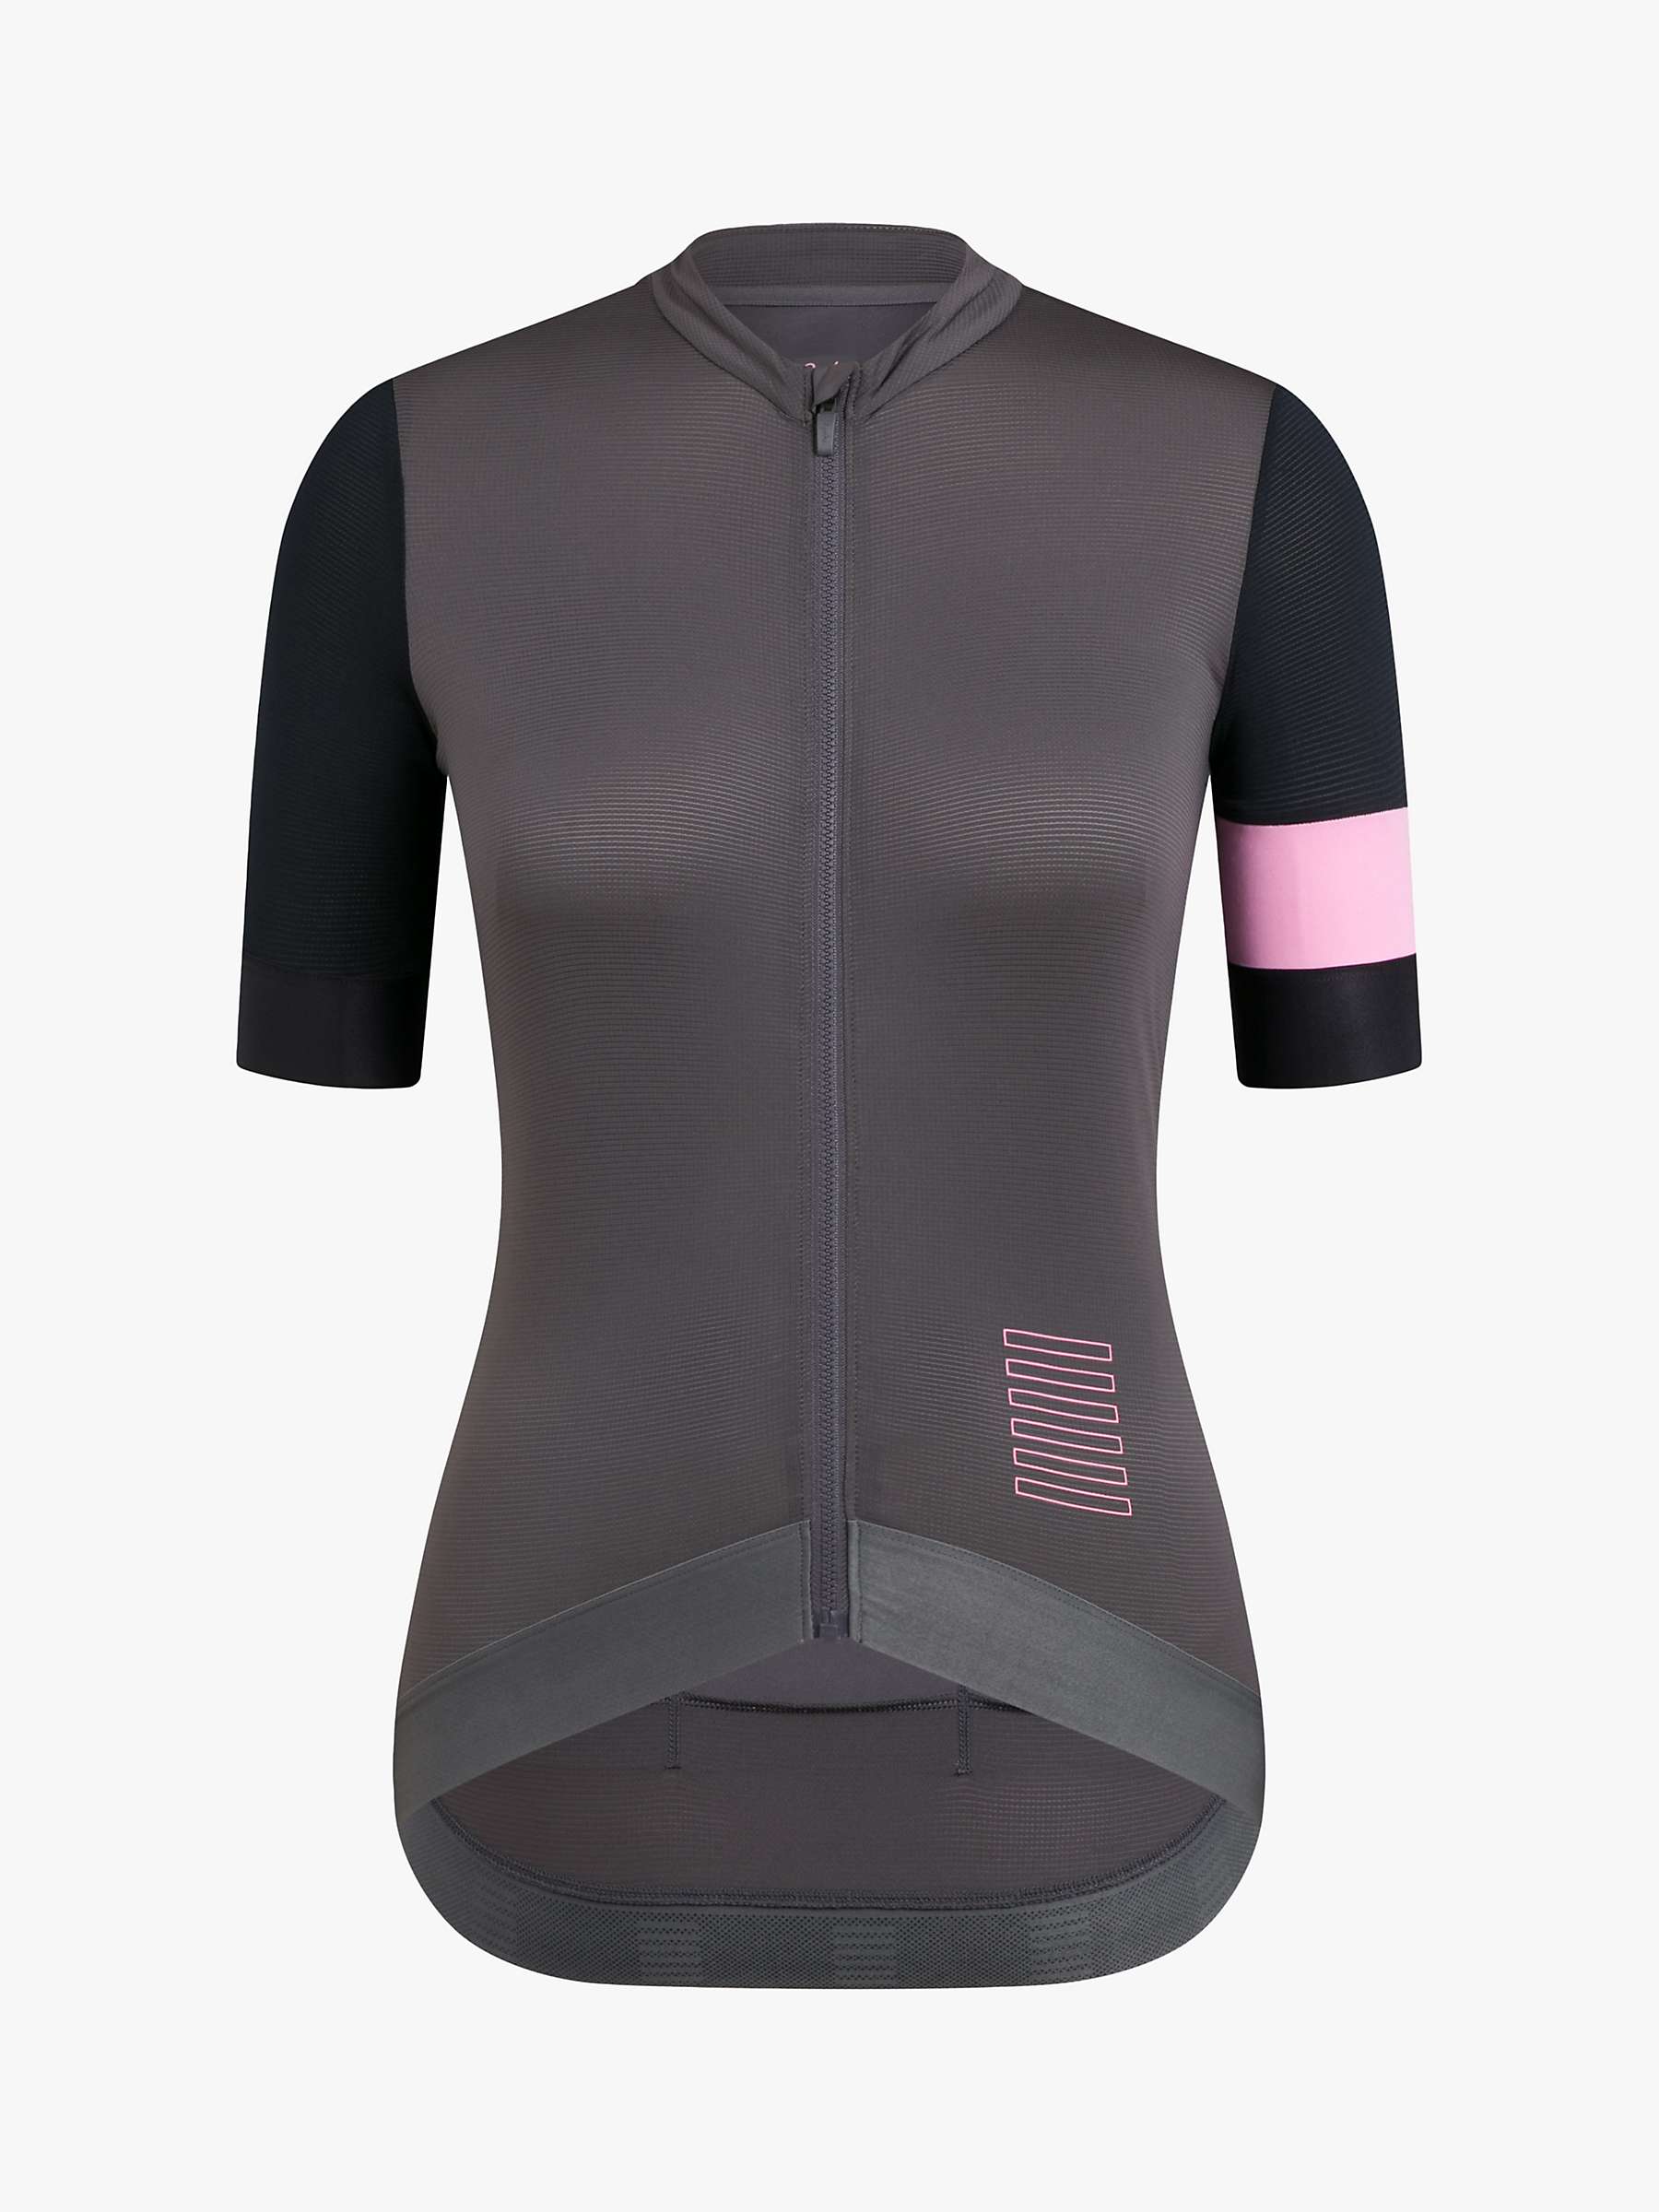 Buy Rapha Pro Team Training Jersey Short Sleeve Cycling Top Online at johnlewis.com